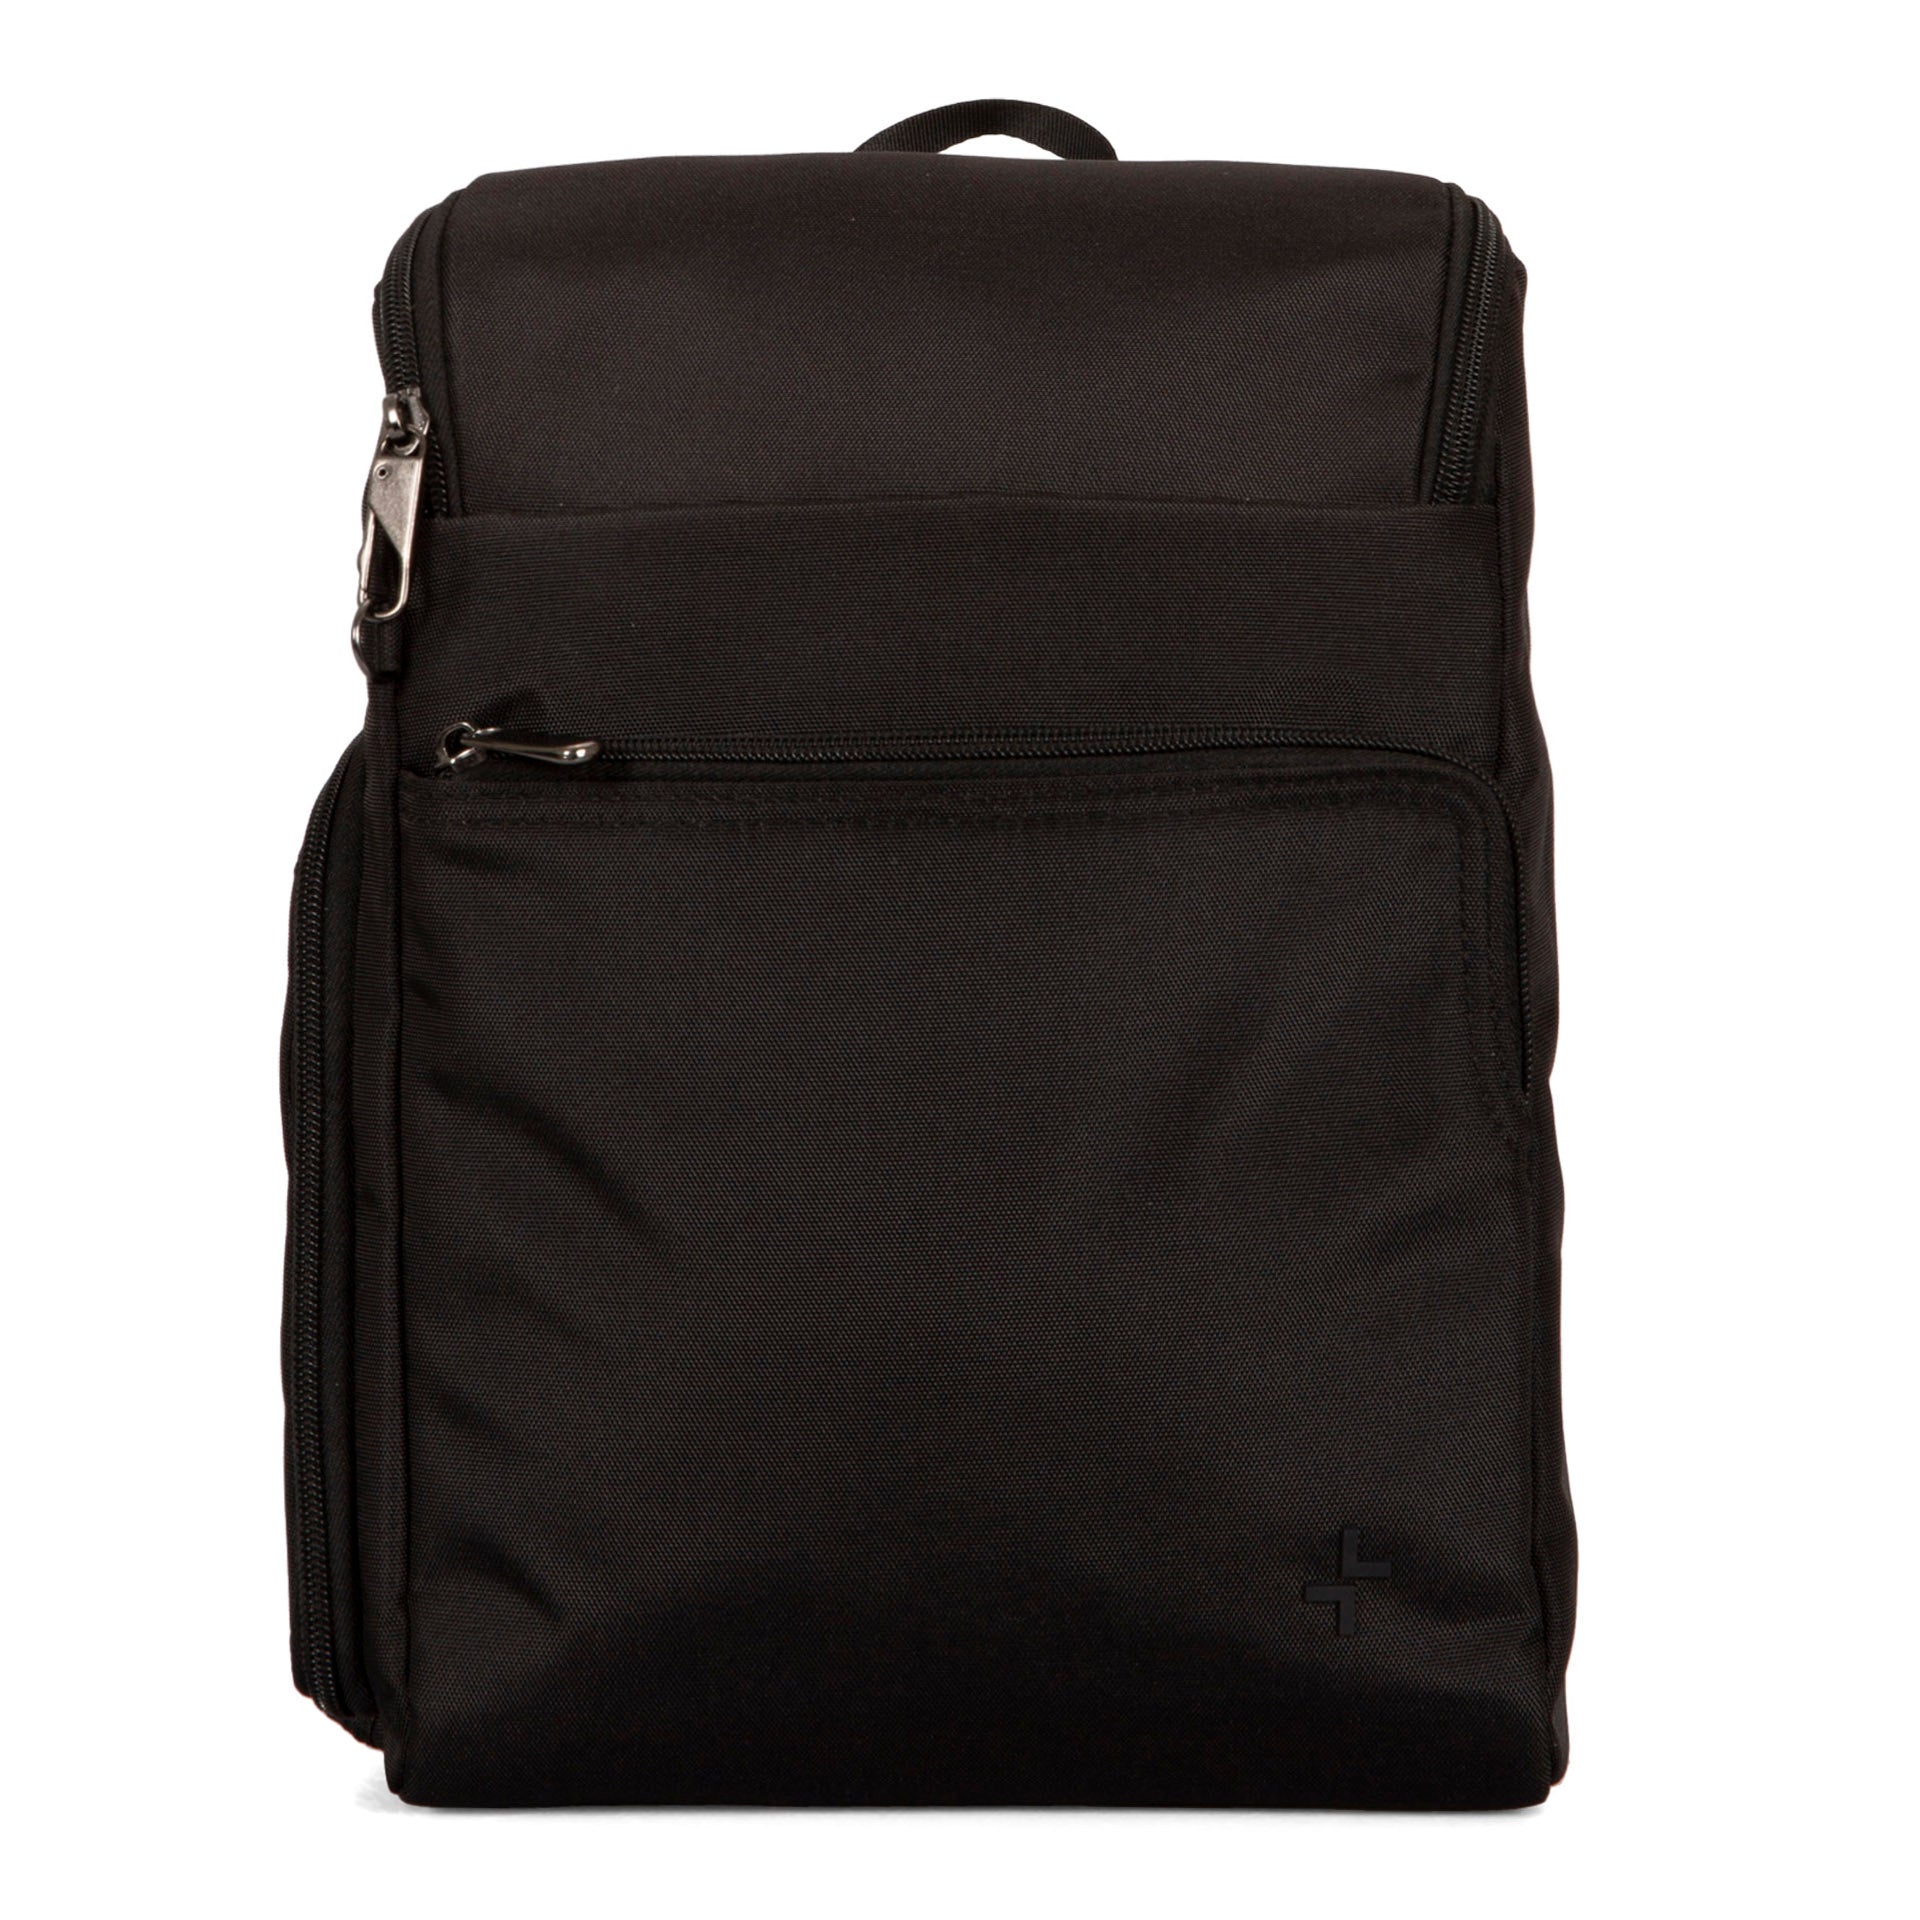 Parker Convertible Backpack - ZB1515001 - Fossil